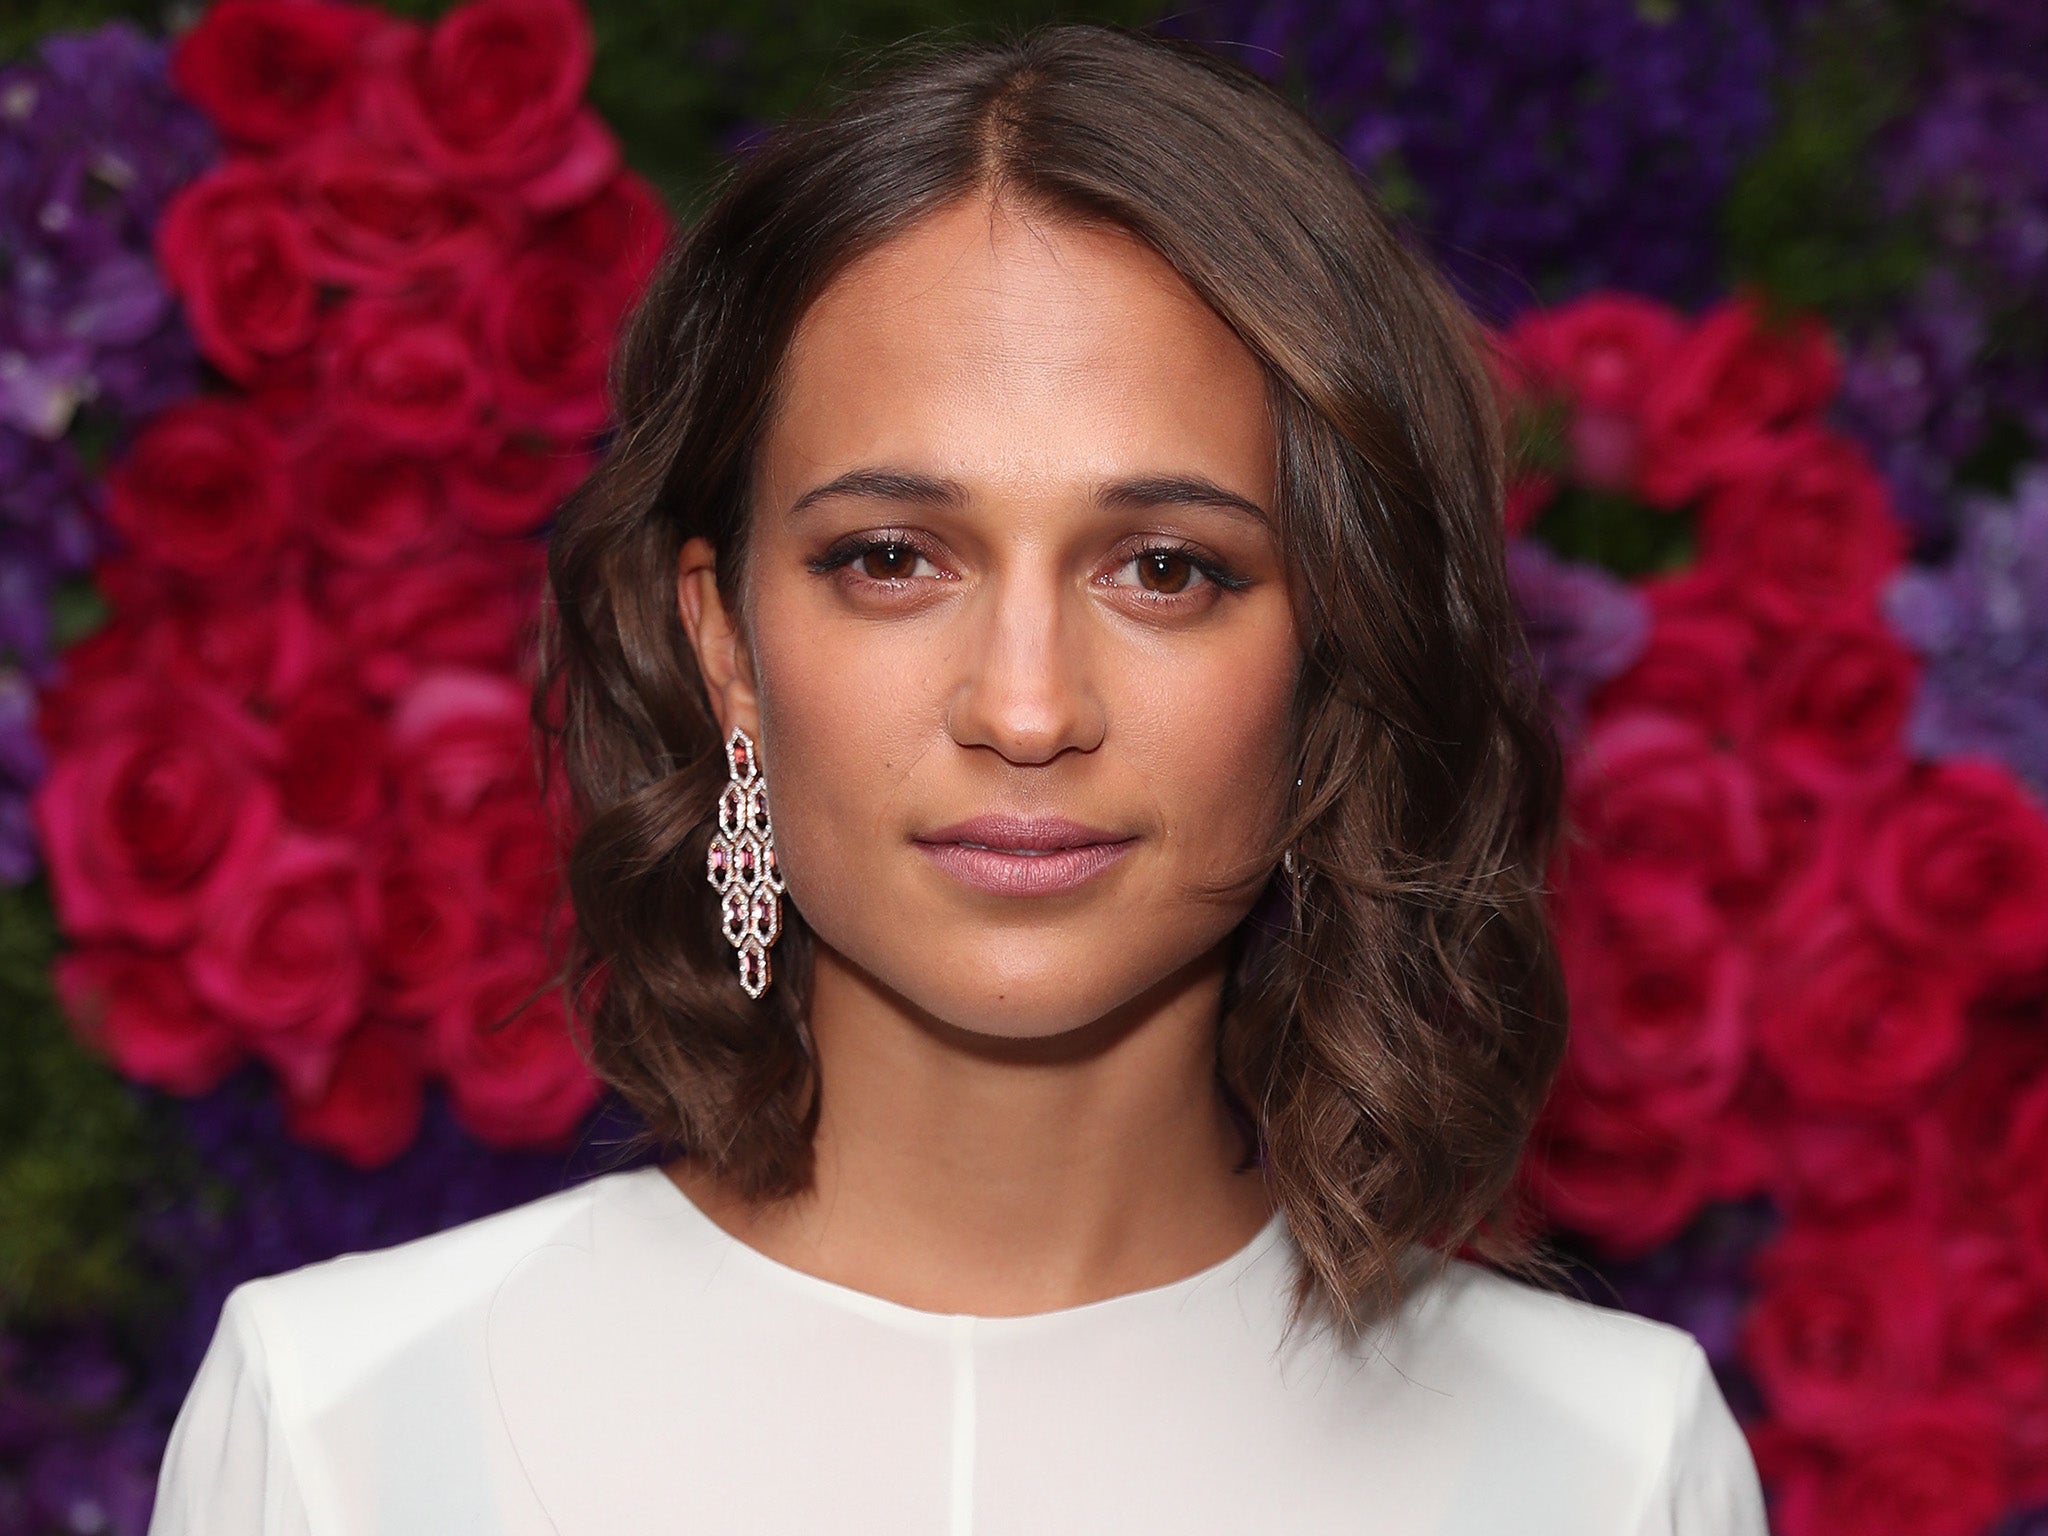 'Tomb Raider' star Alicia Vikander launched her production company Vikarious last year